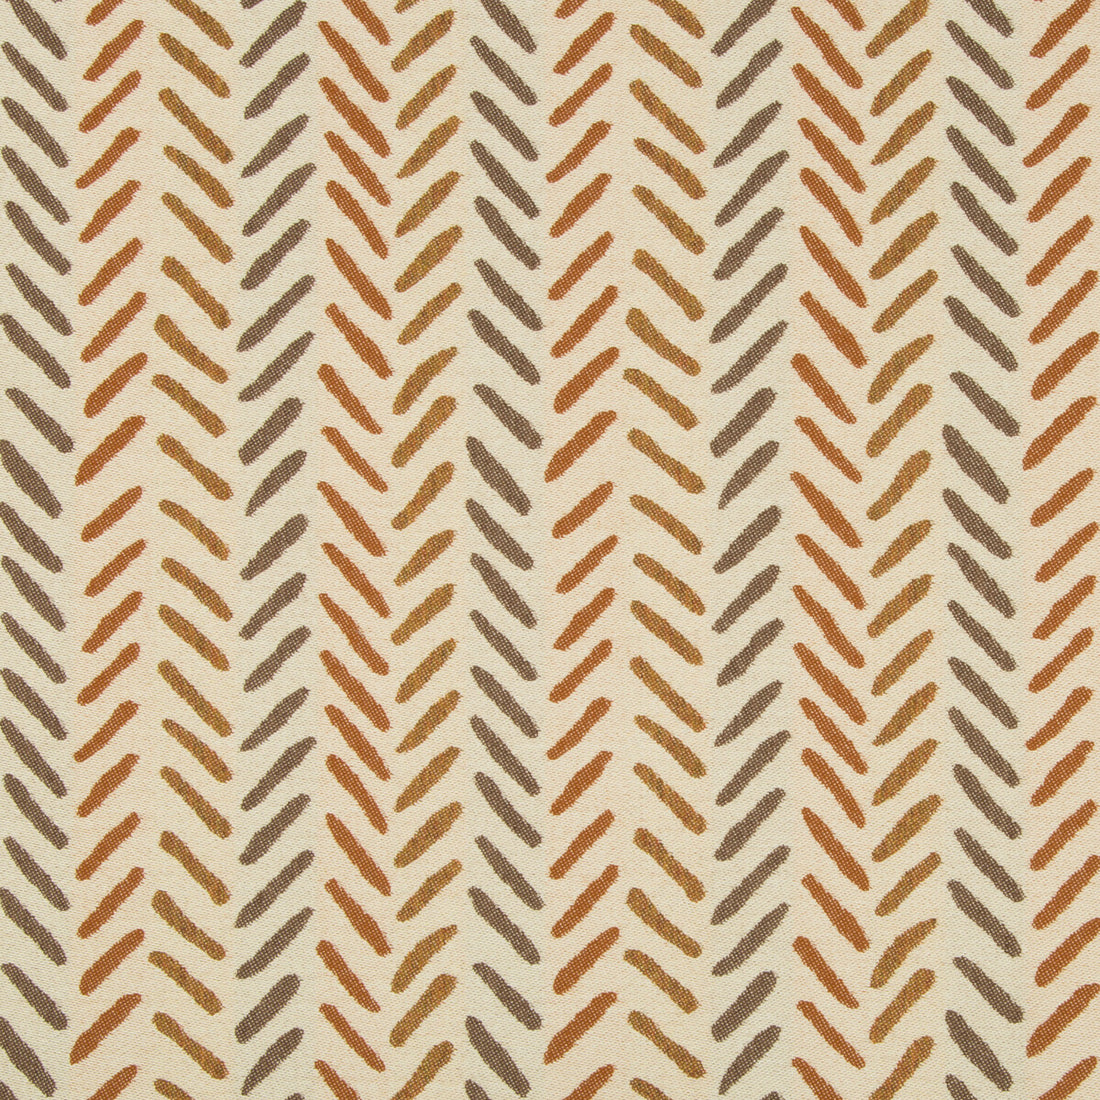 Sands Of Time fabric in earth color - pattern 31949.1624.0 - by Kravet Design in the Oceania Indoor Outdoor collection